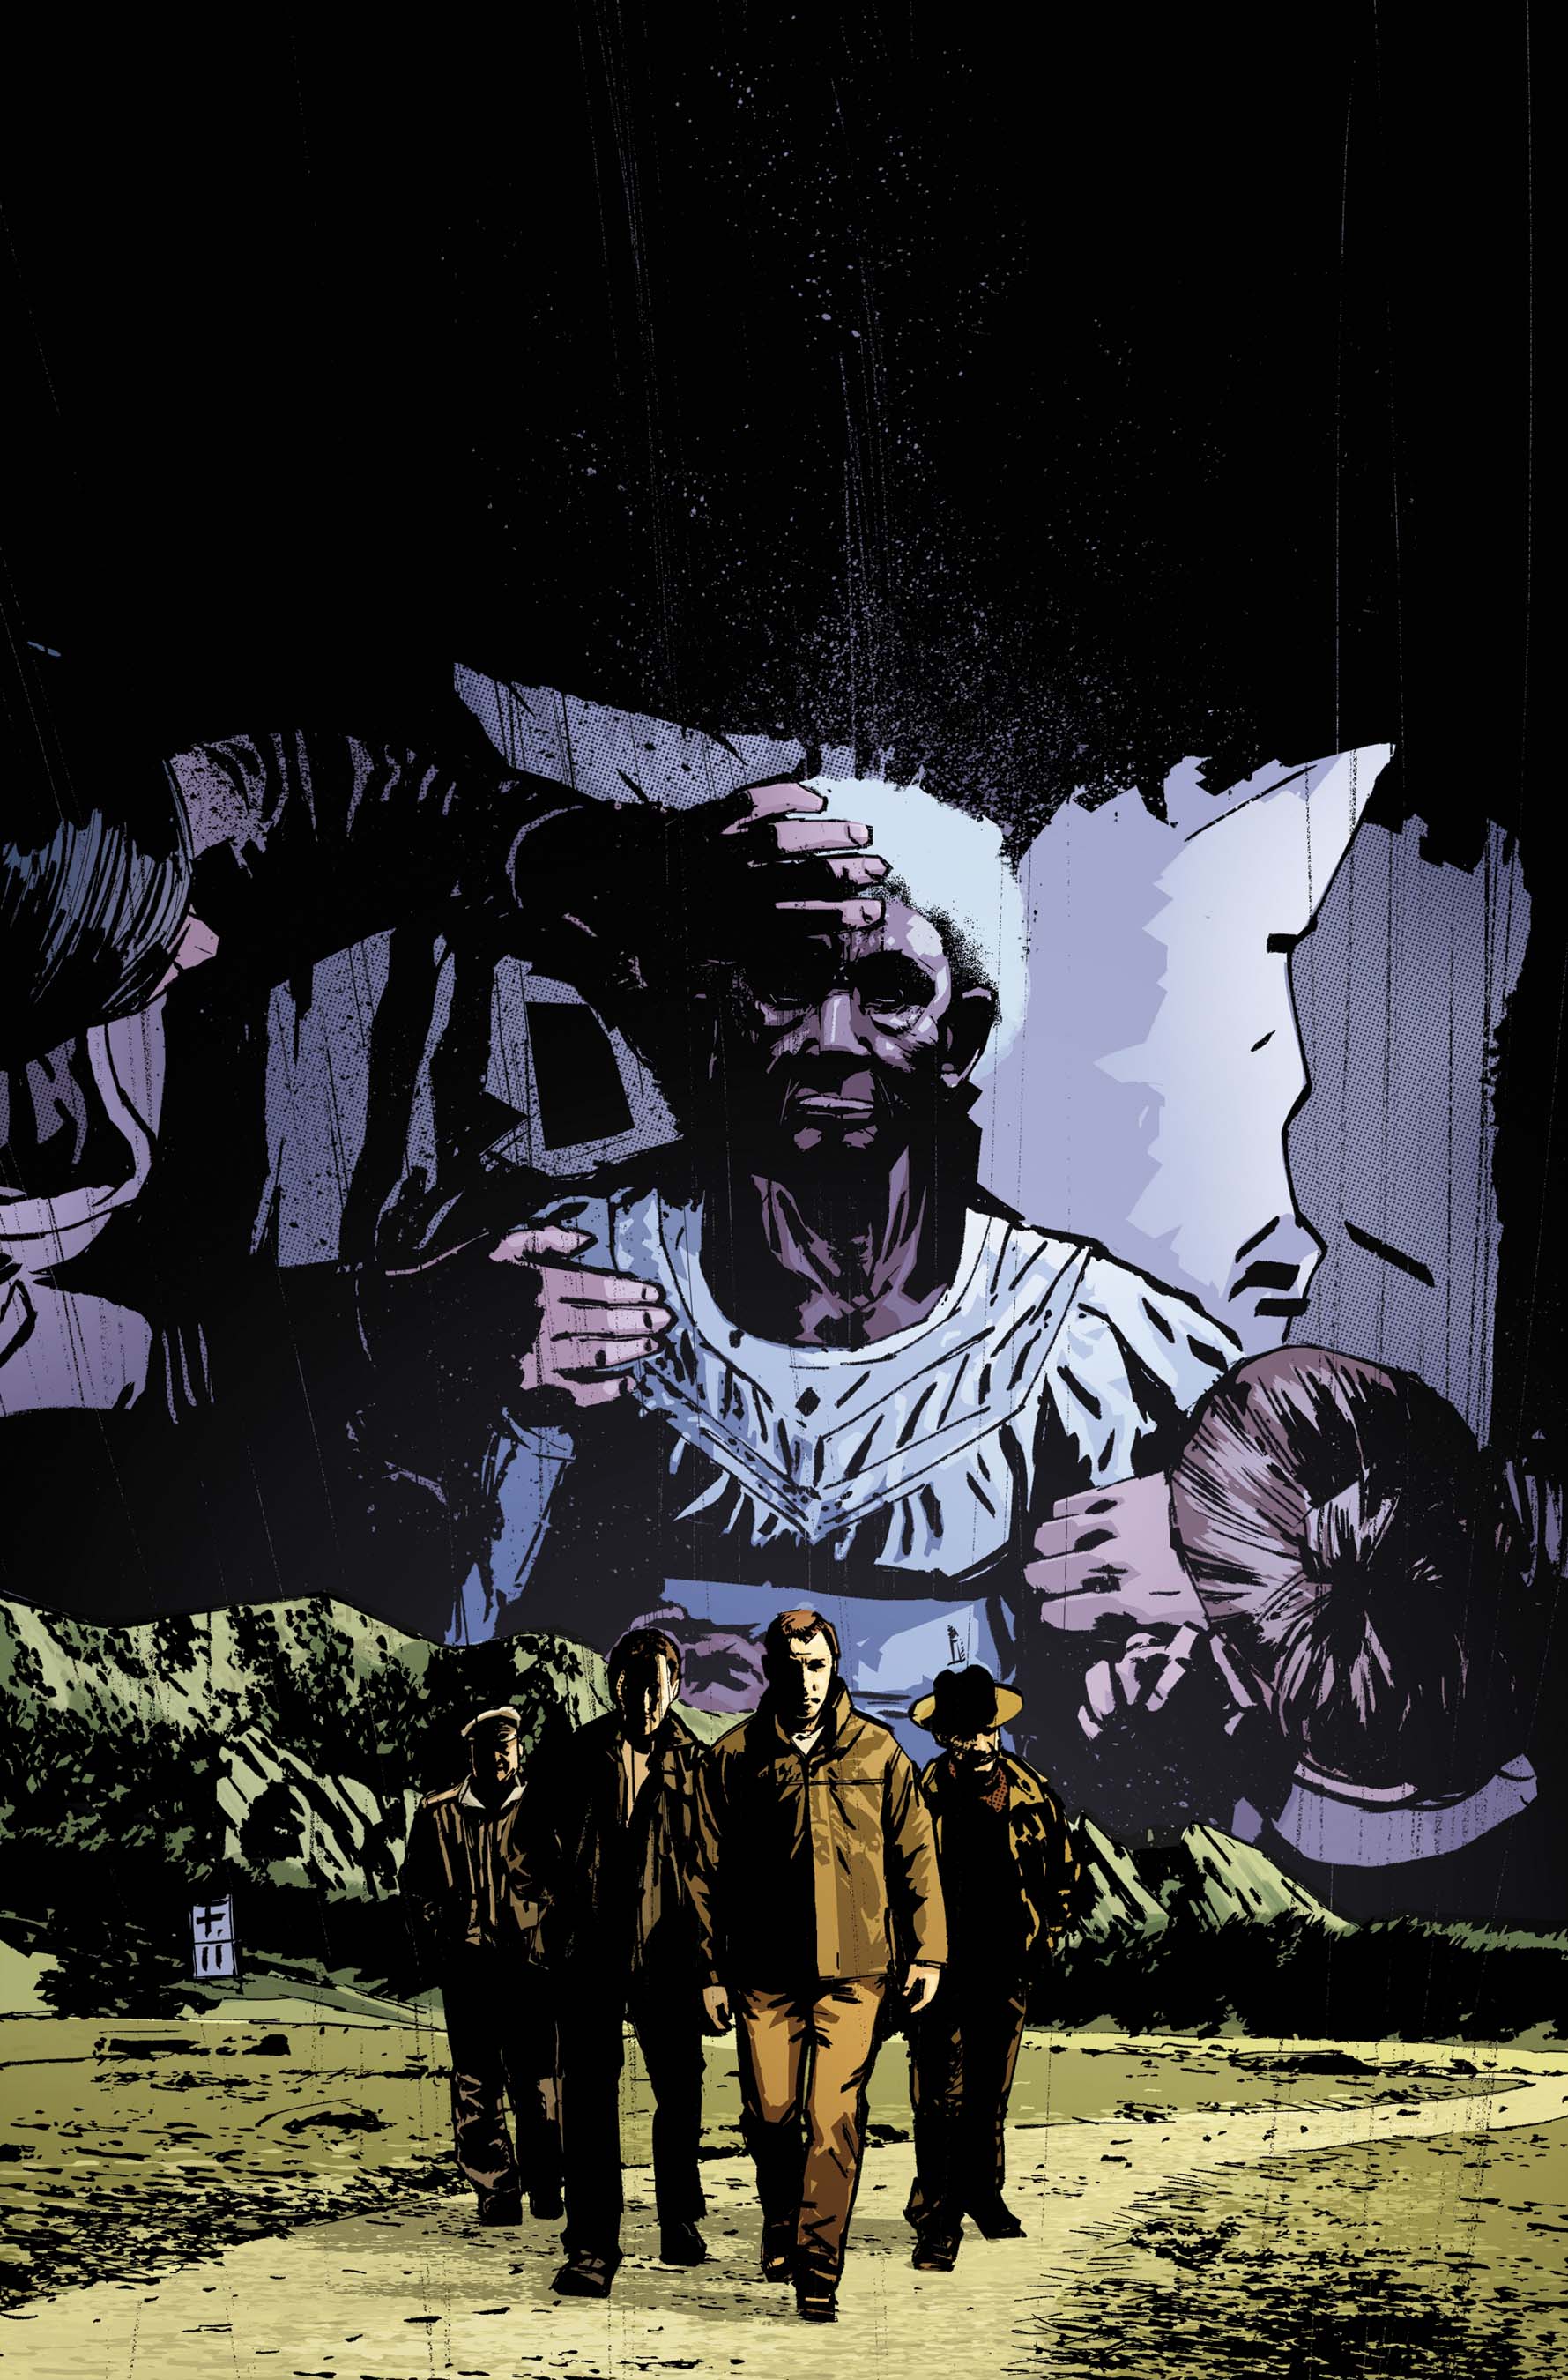 The Stand: No Man's Land (2010) #5